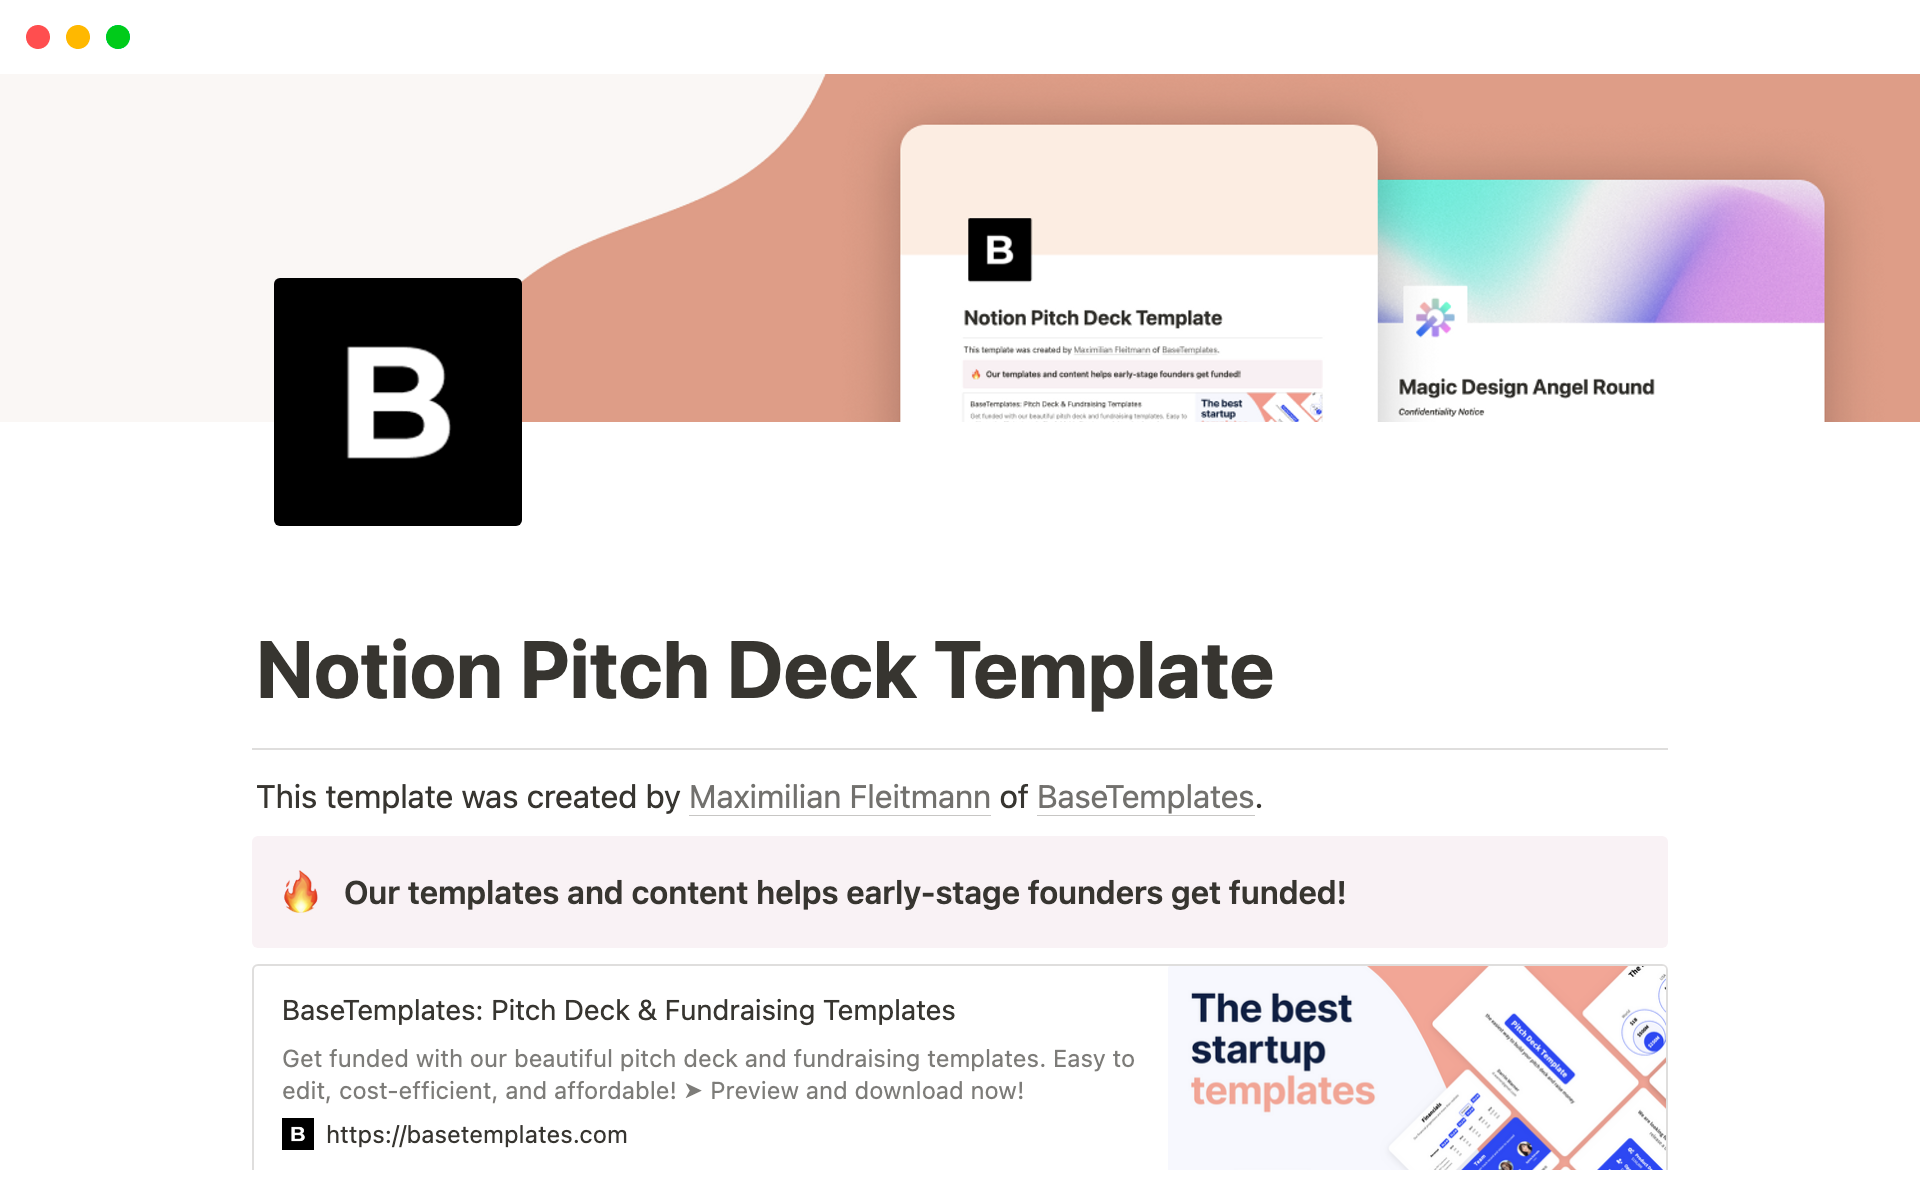 Use Notion to build your investor pitch deck and get funded.